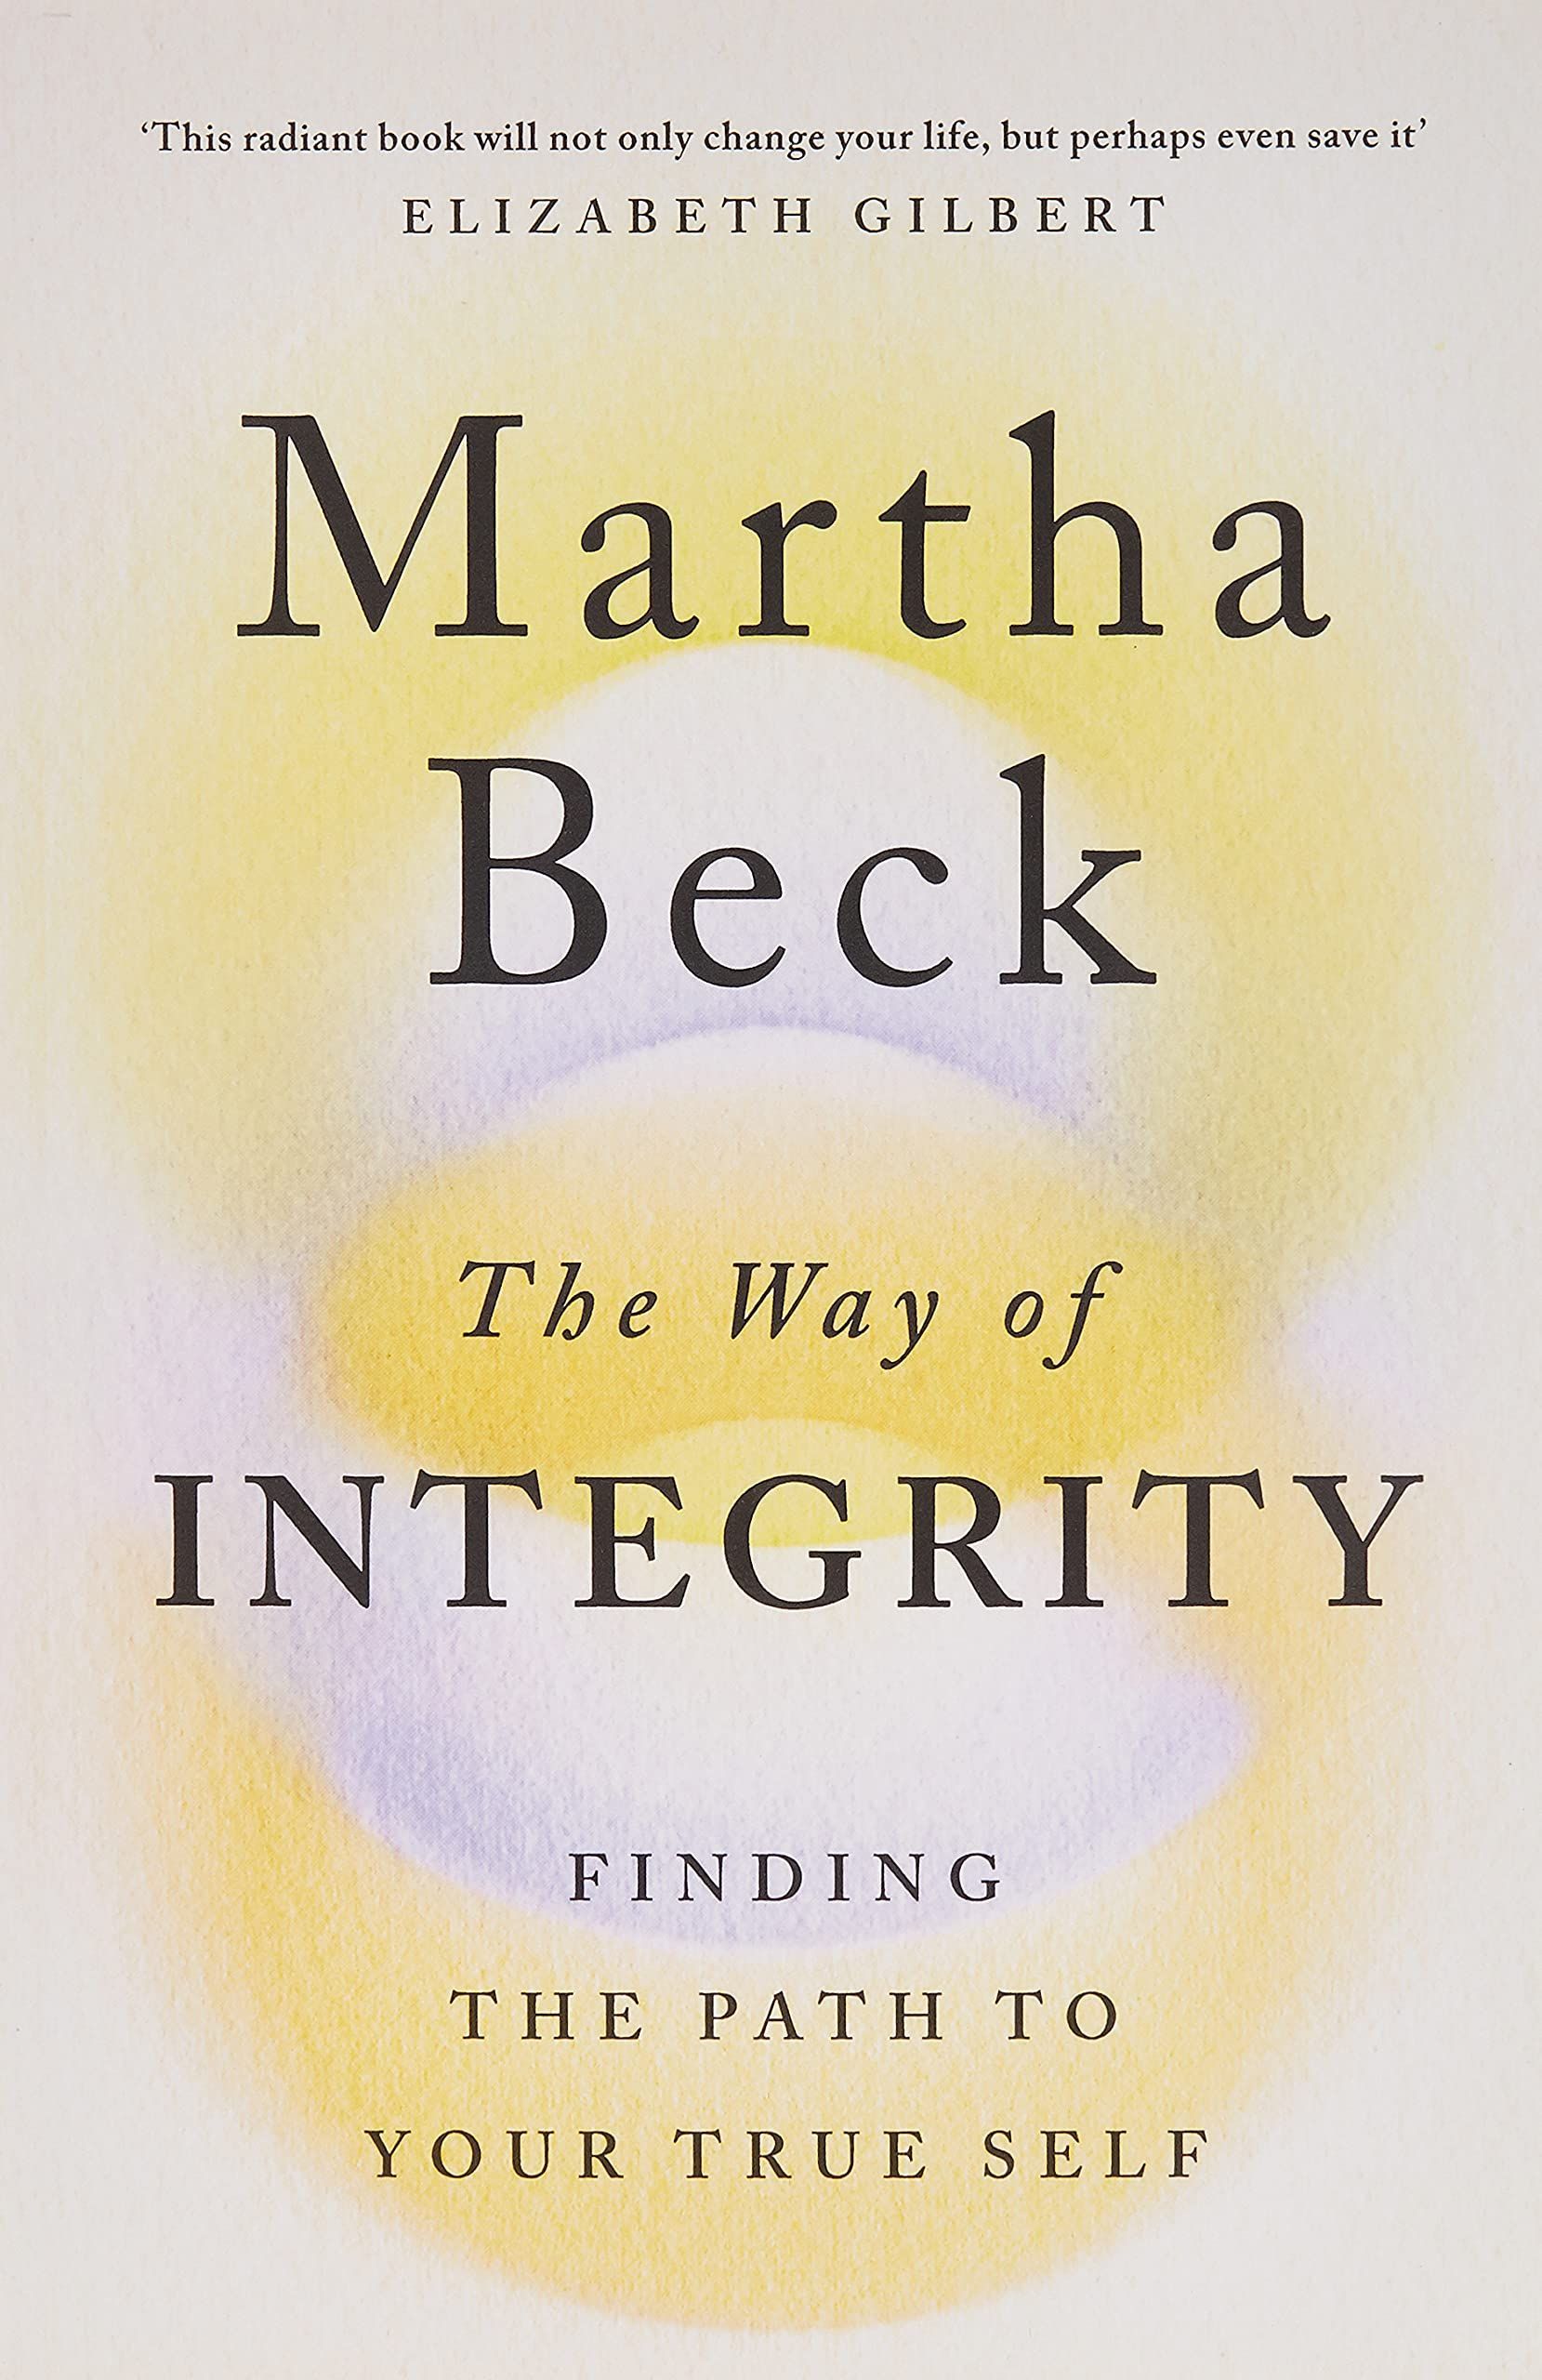 'The Way of Integrity' by Martha Beck